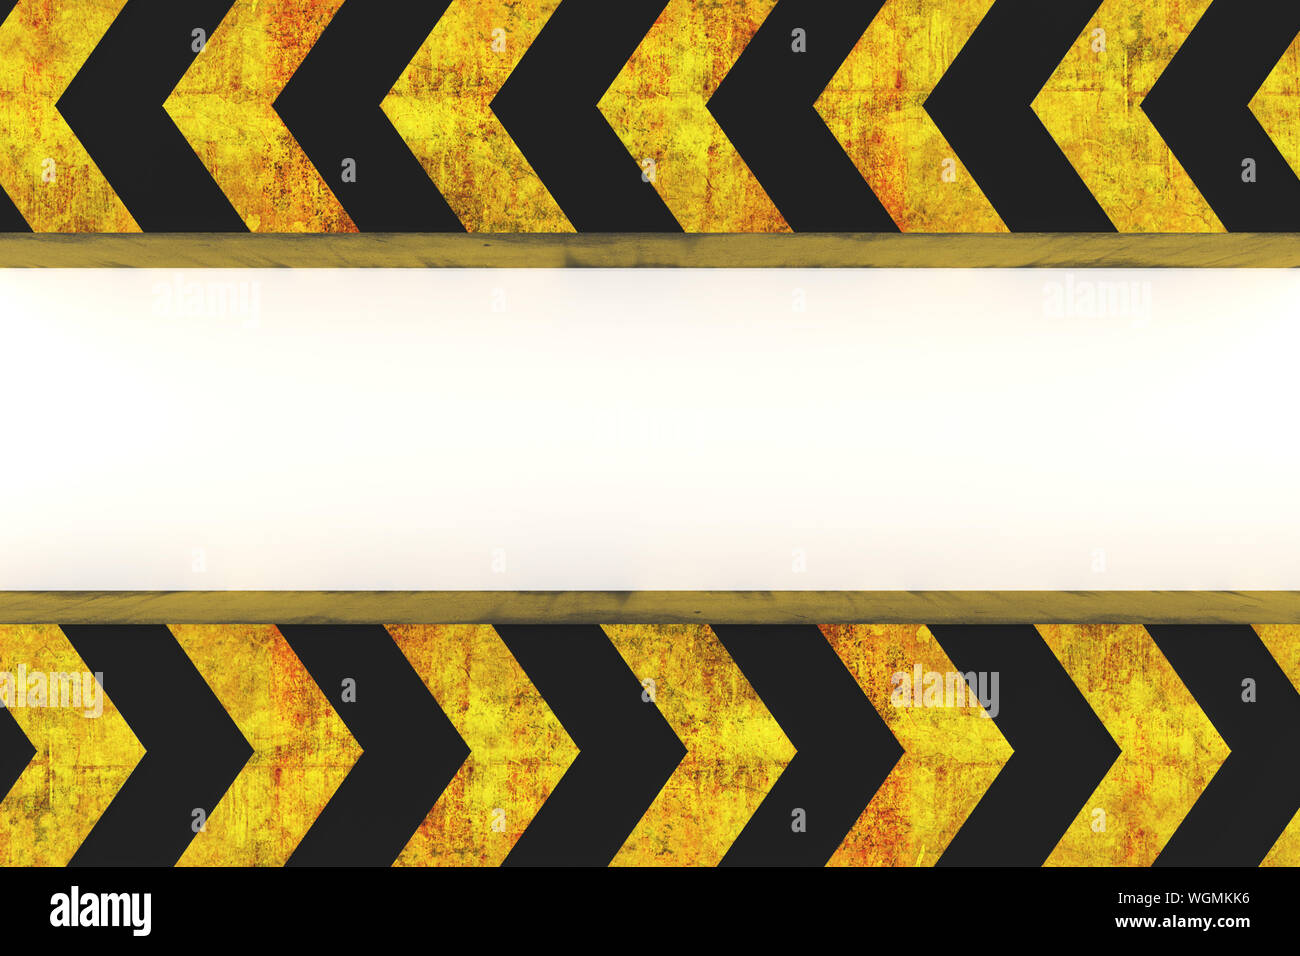 warning hazard grunge pattern in yellow and black color on white background Stock Photo